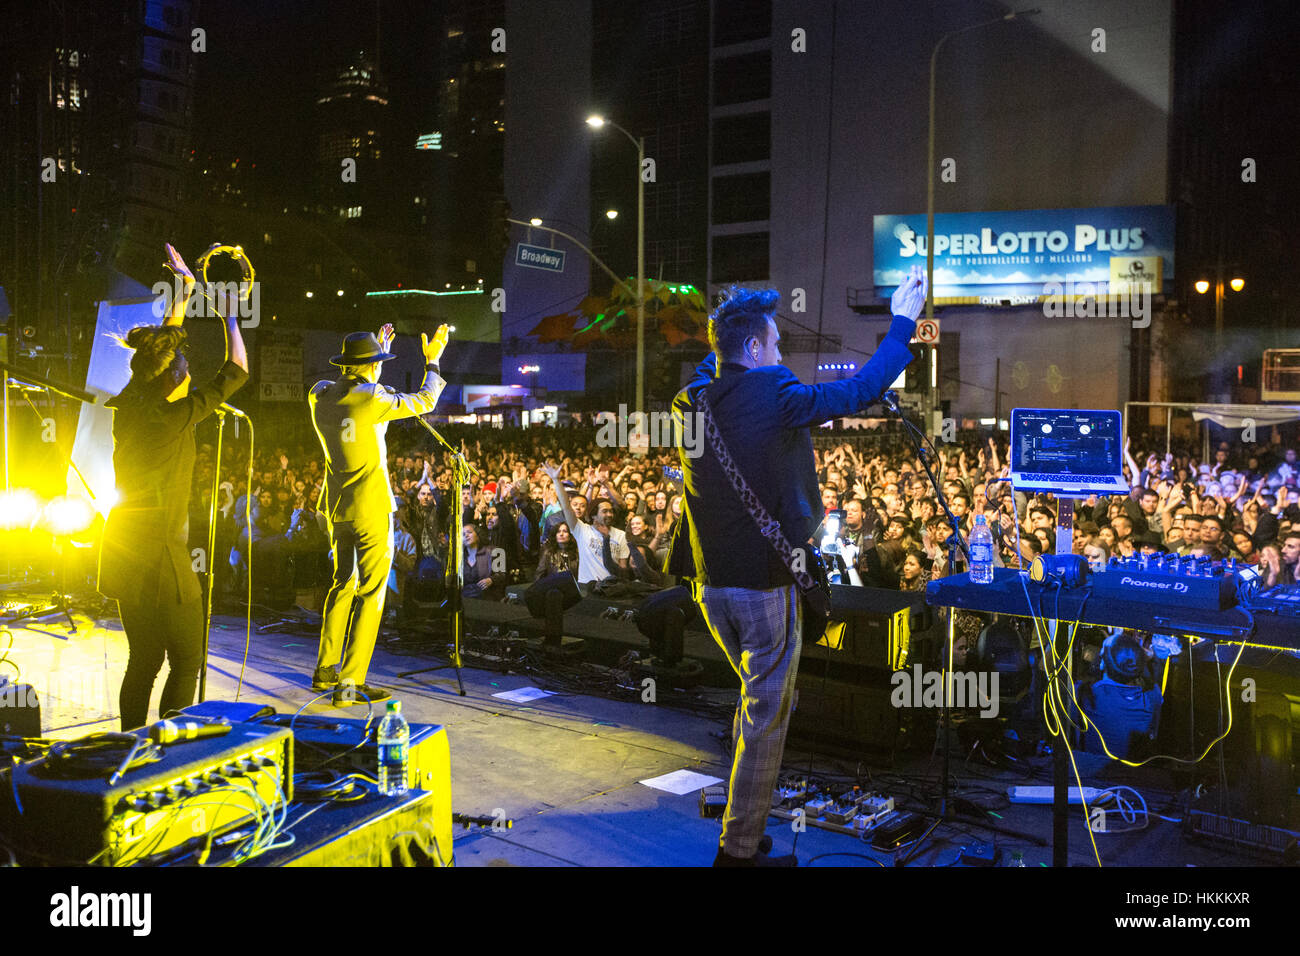 Los Angeles, California, USA. 28th Jan, 2017. Music artist Mayer Hawthorne performs on stage with his band at the 'Night on Broadway' arts and music festival in downtown Los Angeles, California, USA, on January 28th, 2017. Credit: Sheri Determan/Alamy Live News Stock Photo